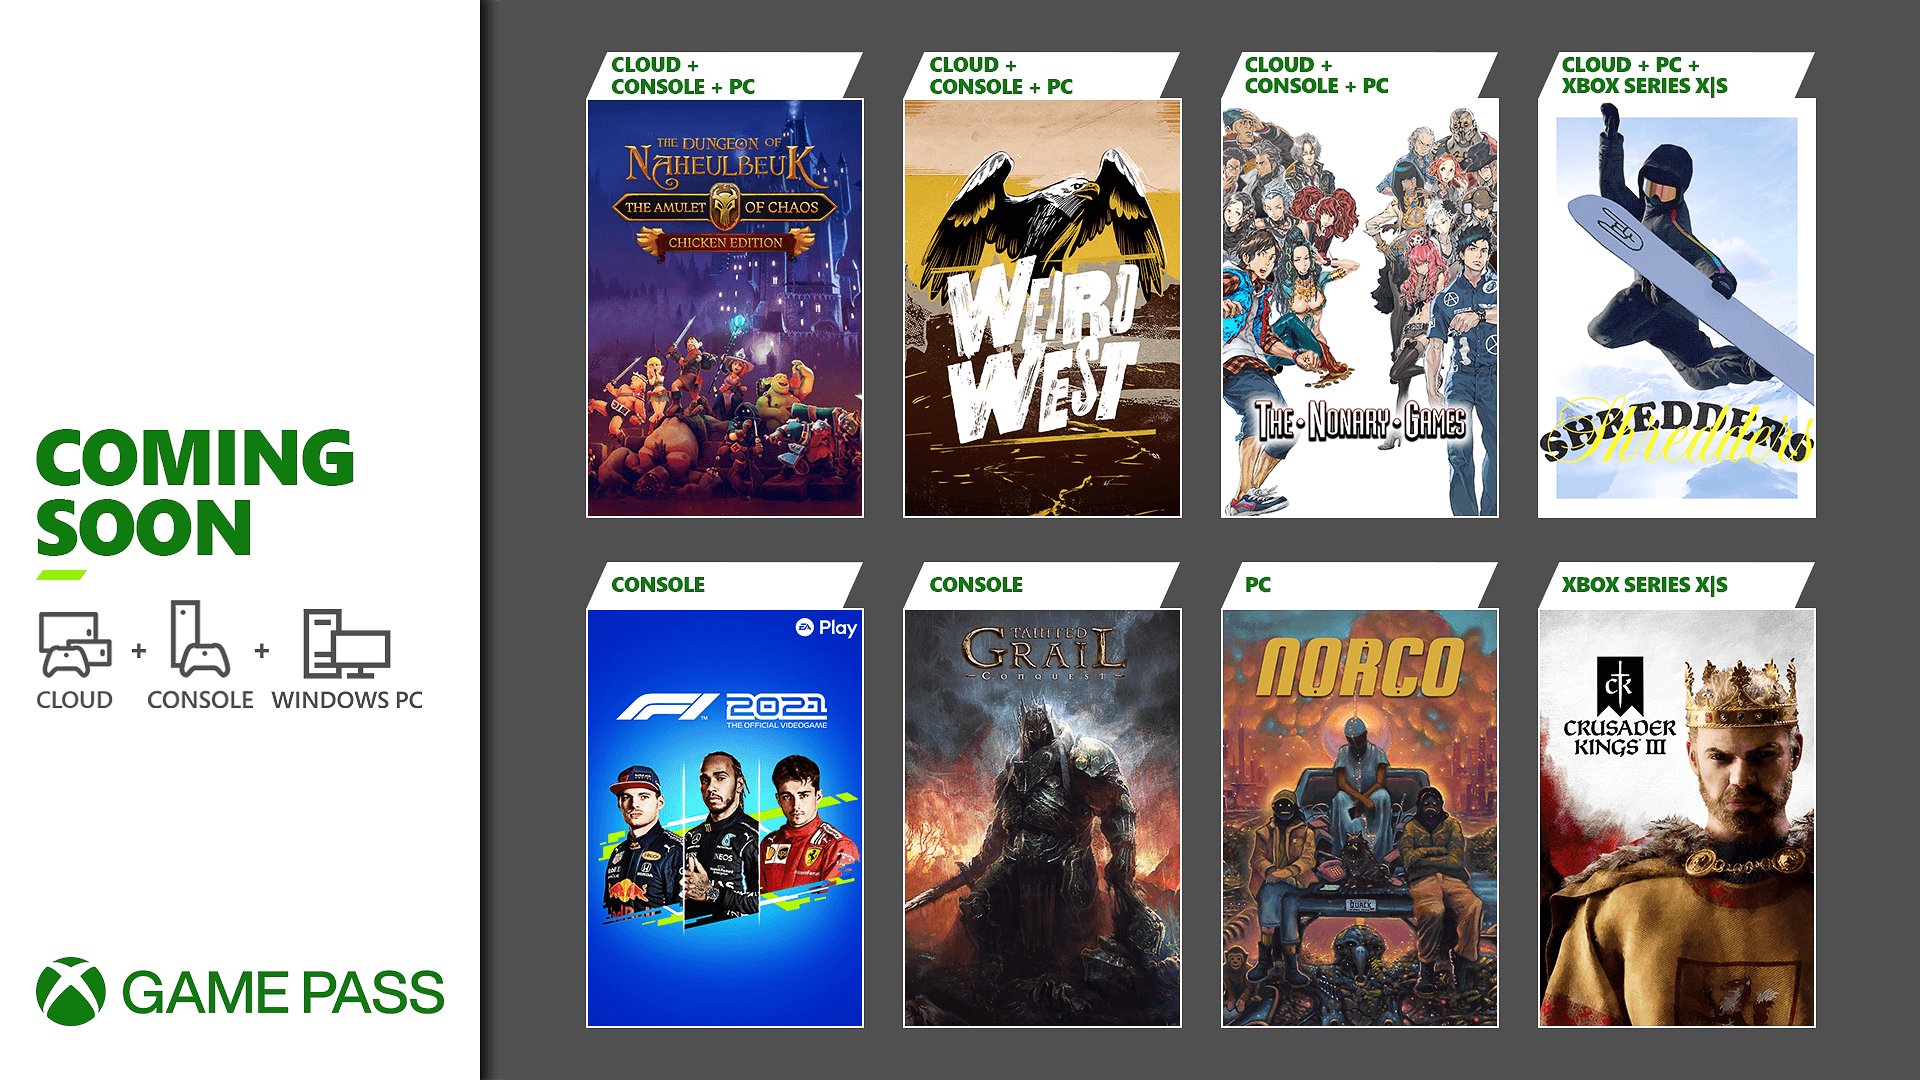 Rumored Xbox Game Pass lineup for April 2022 includes Cricket 22